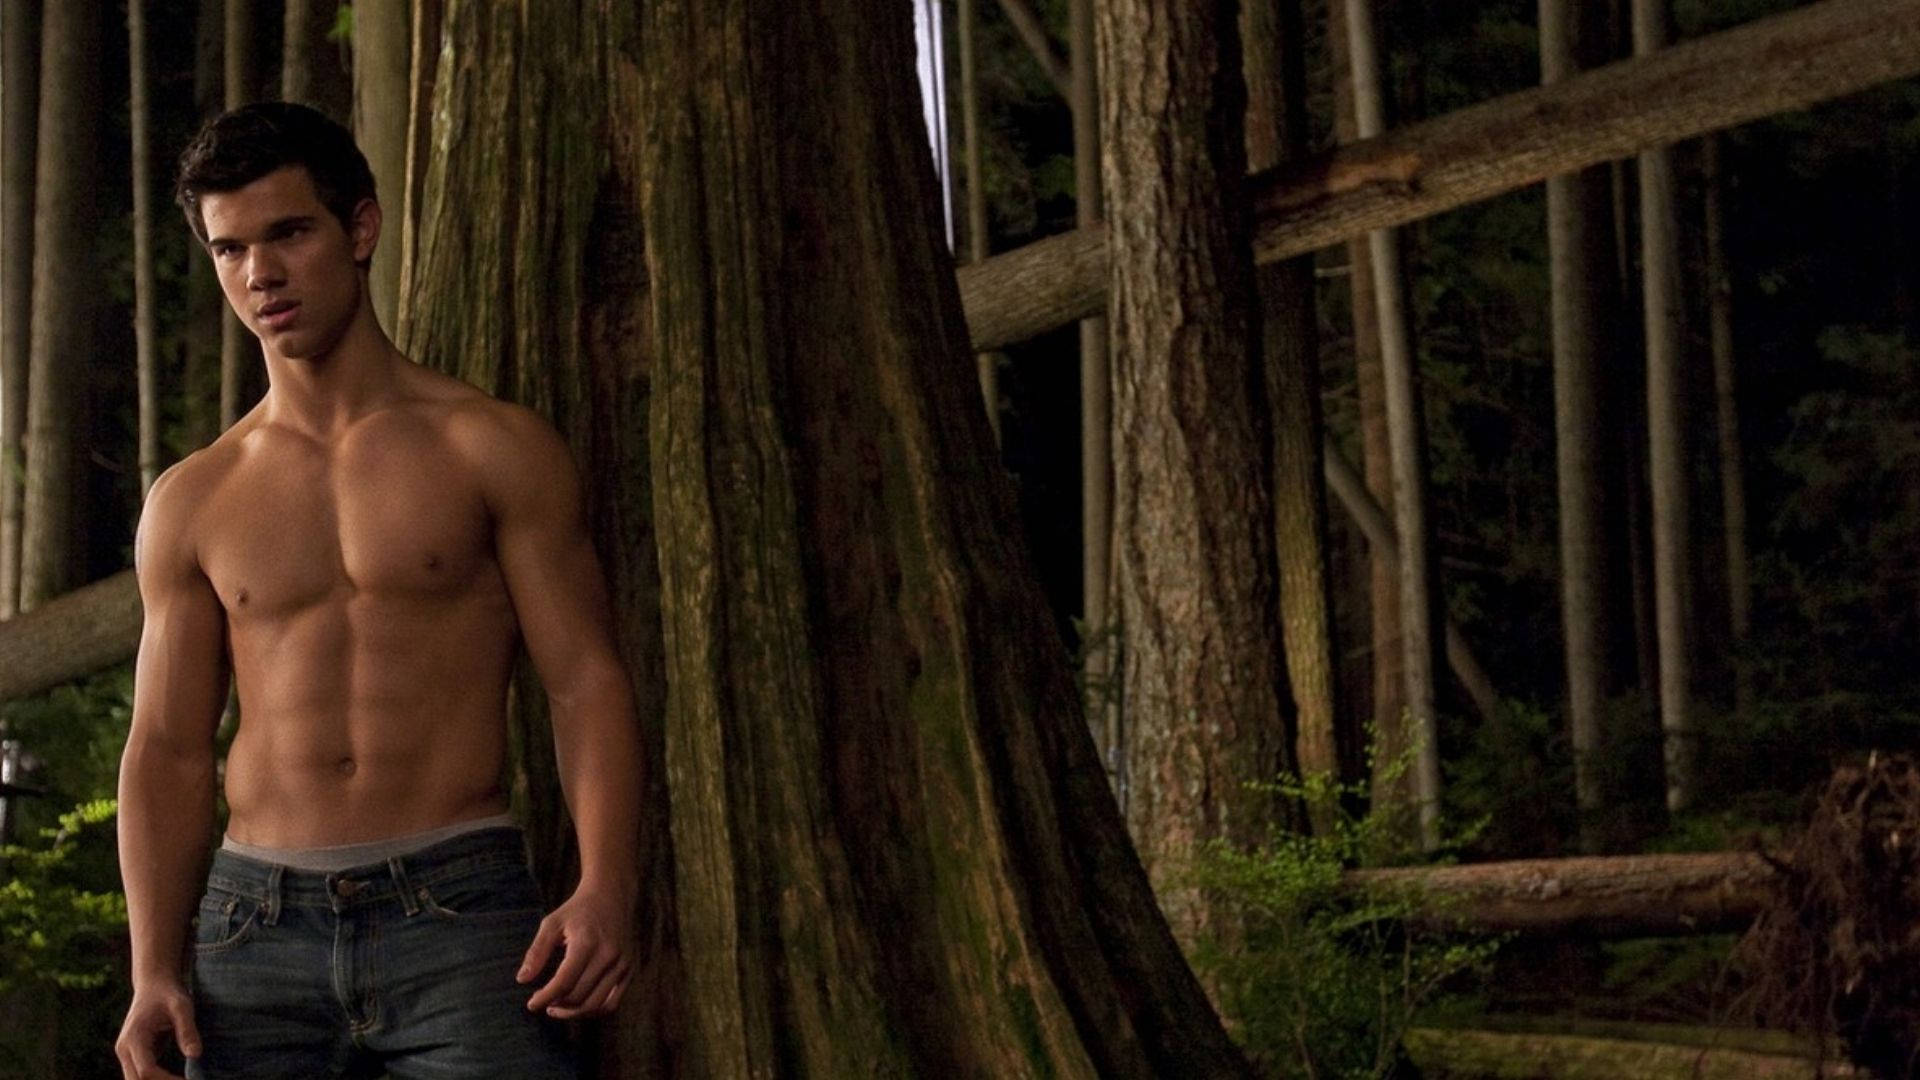 Hunktaylor Lautner I Skogen. (this Would Be A Suitable Phrase For A Computer Or Mobile Wallpaper Image Of Actor Taylor Lautner In A Forest Setting.) Wallpaper